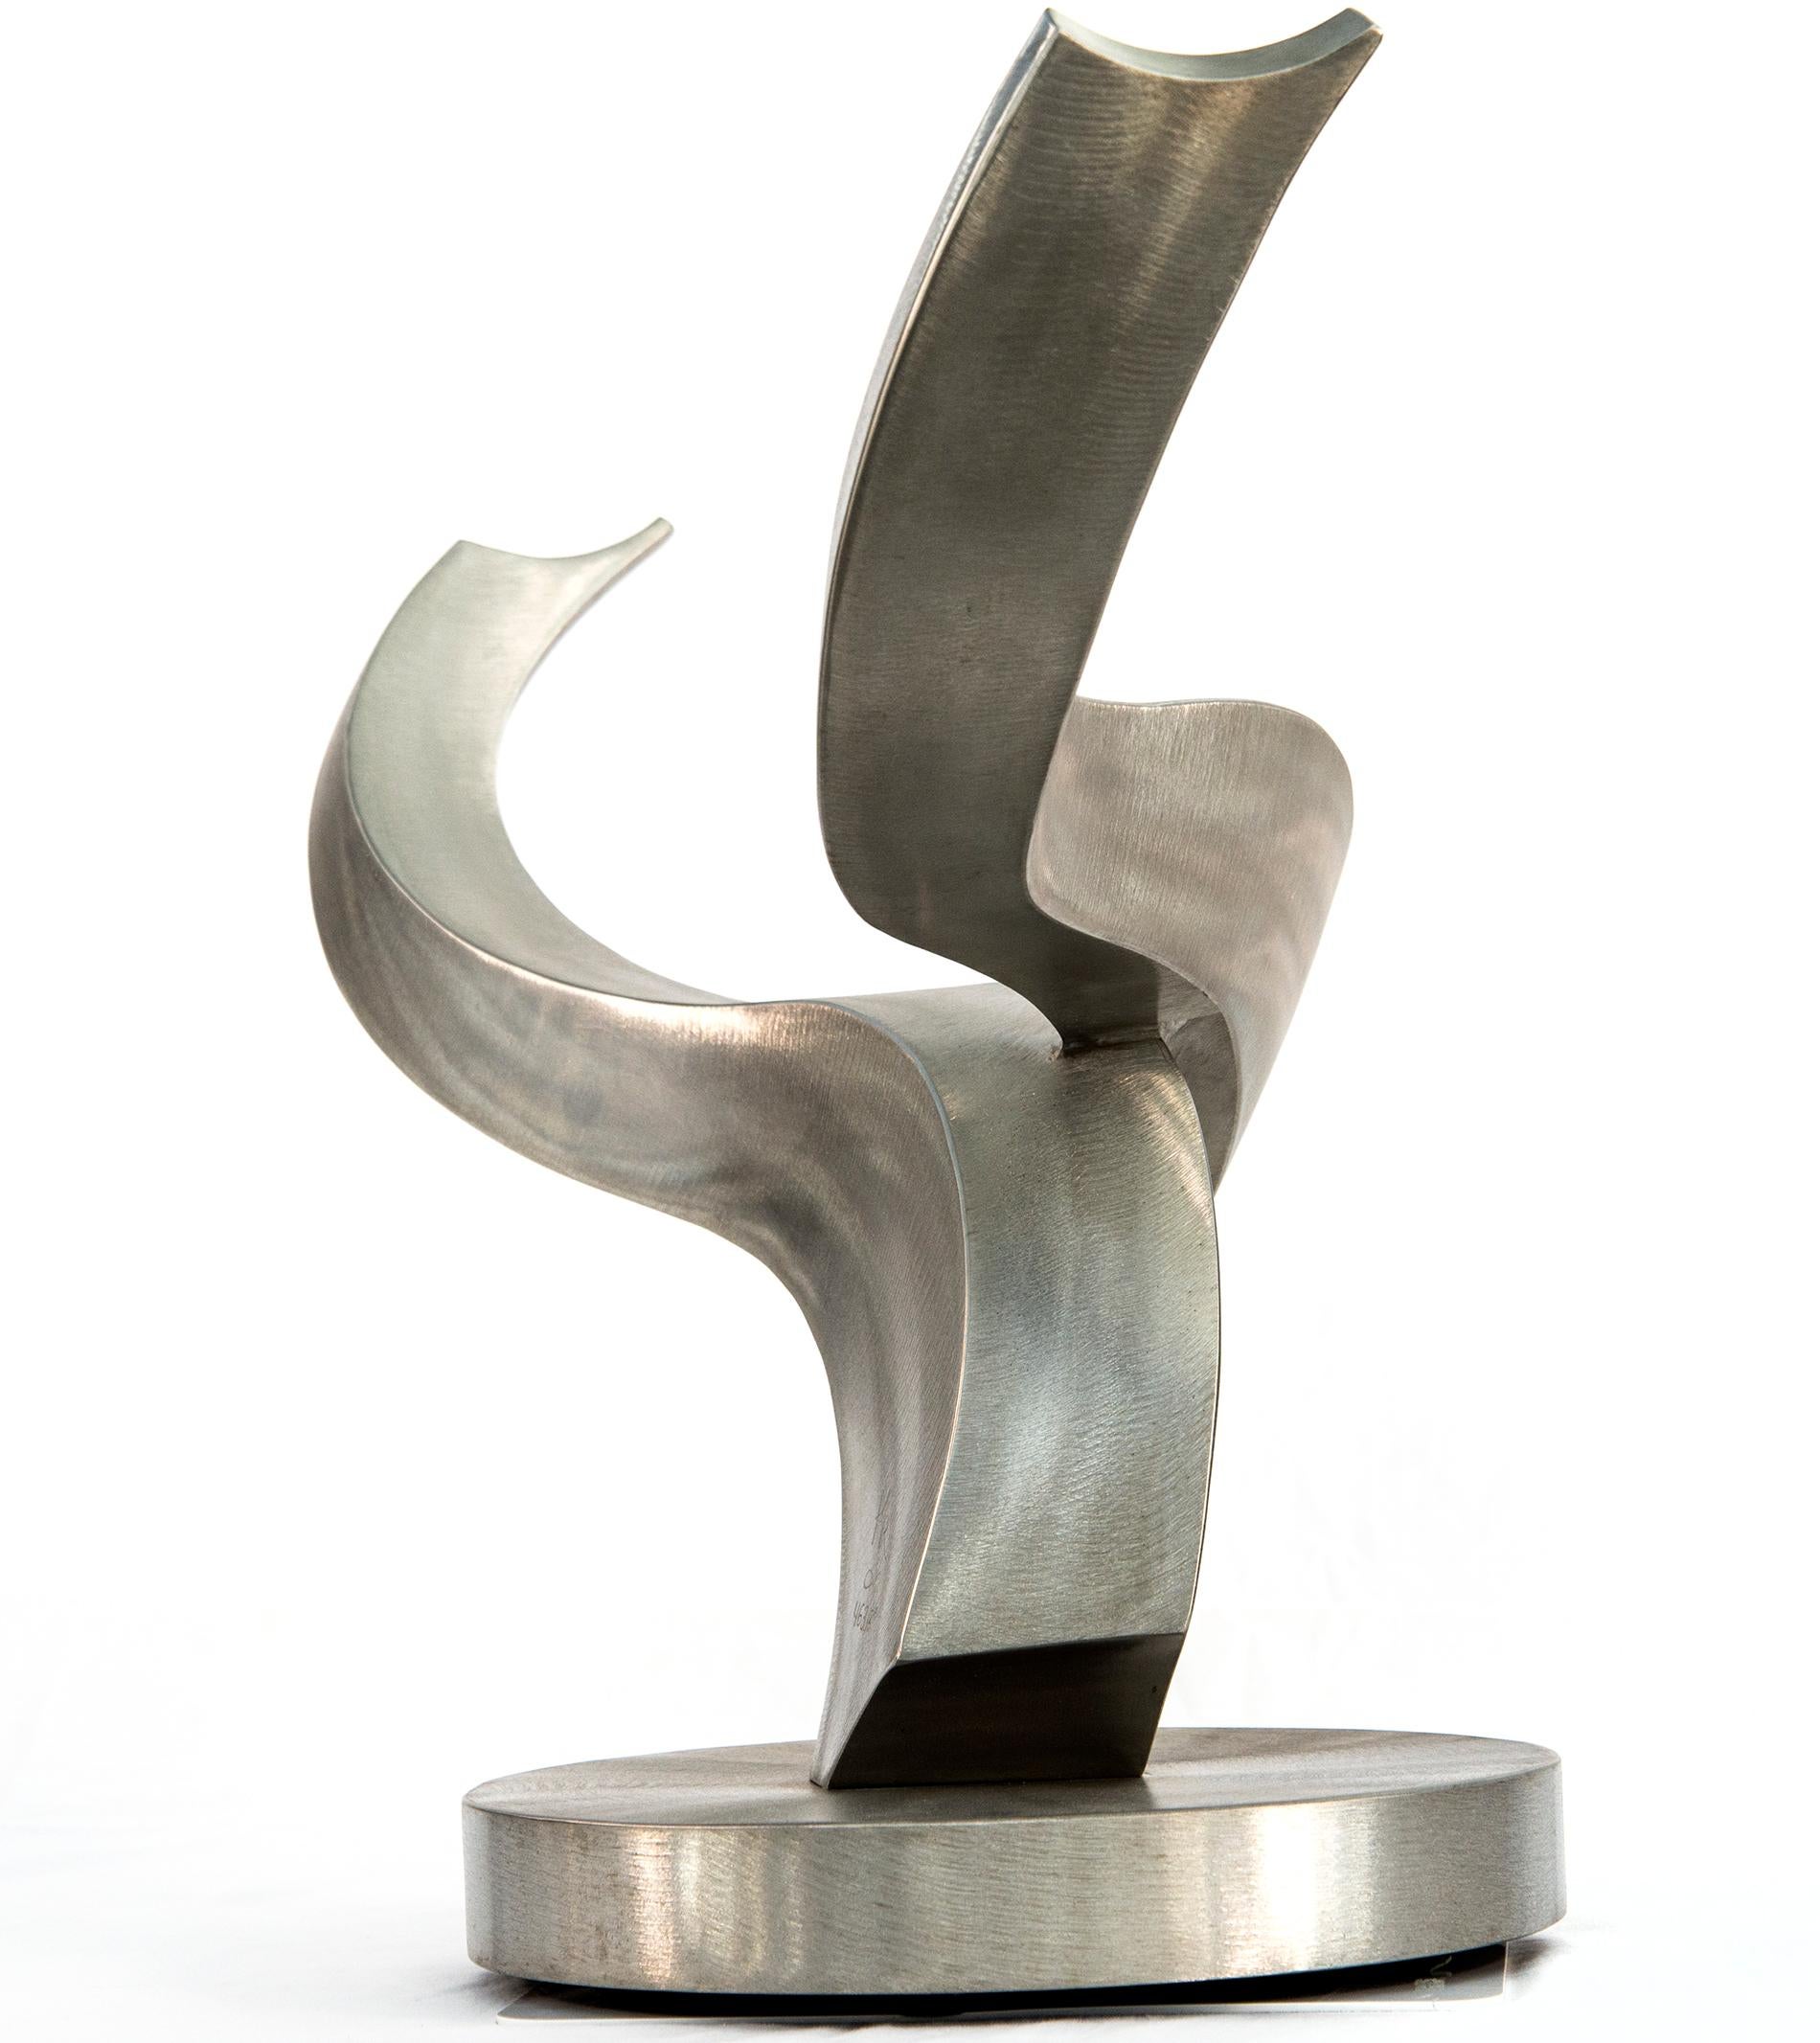 Ready To Soar - Sweeping elongated forms in sleek stainless steel - Sculpture by Kevin Robb